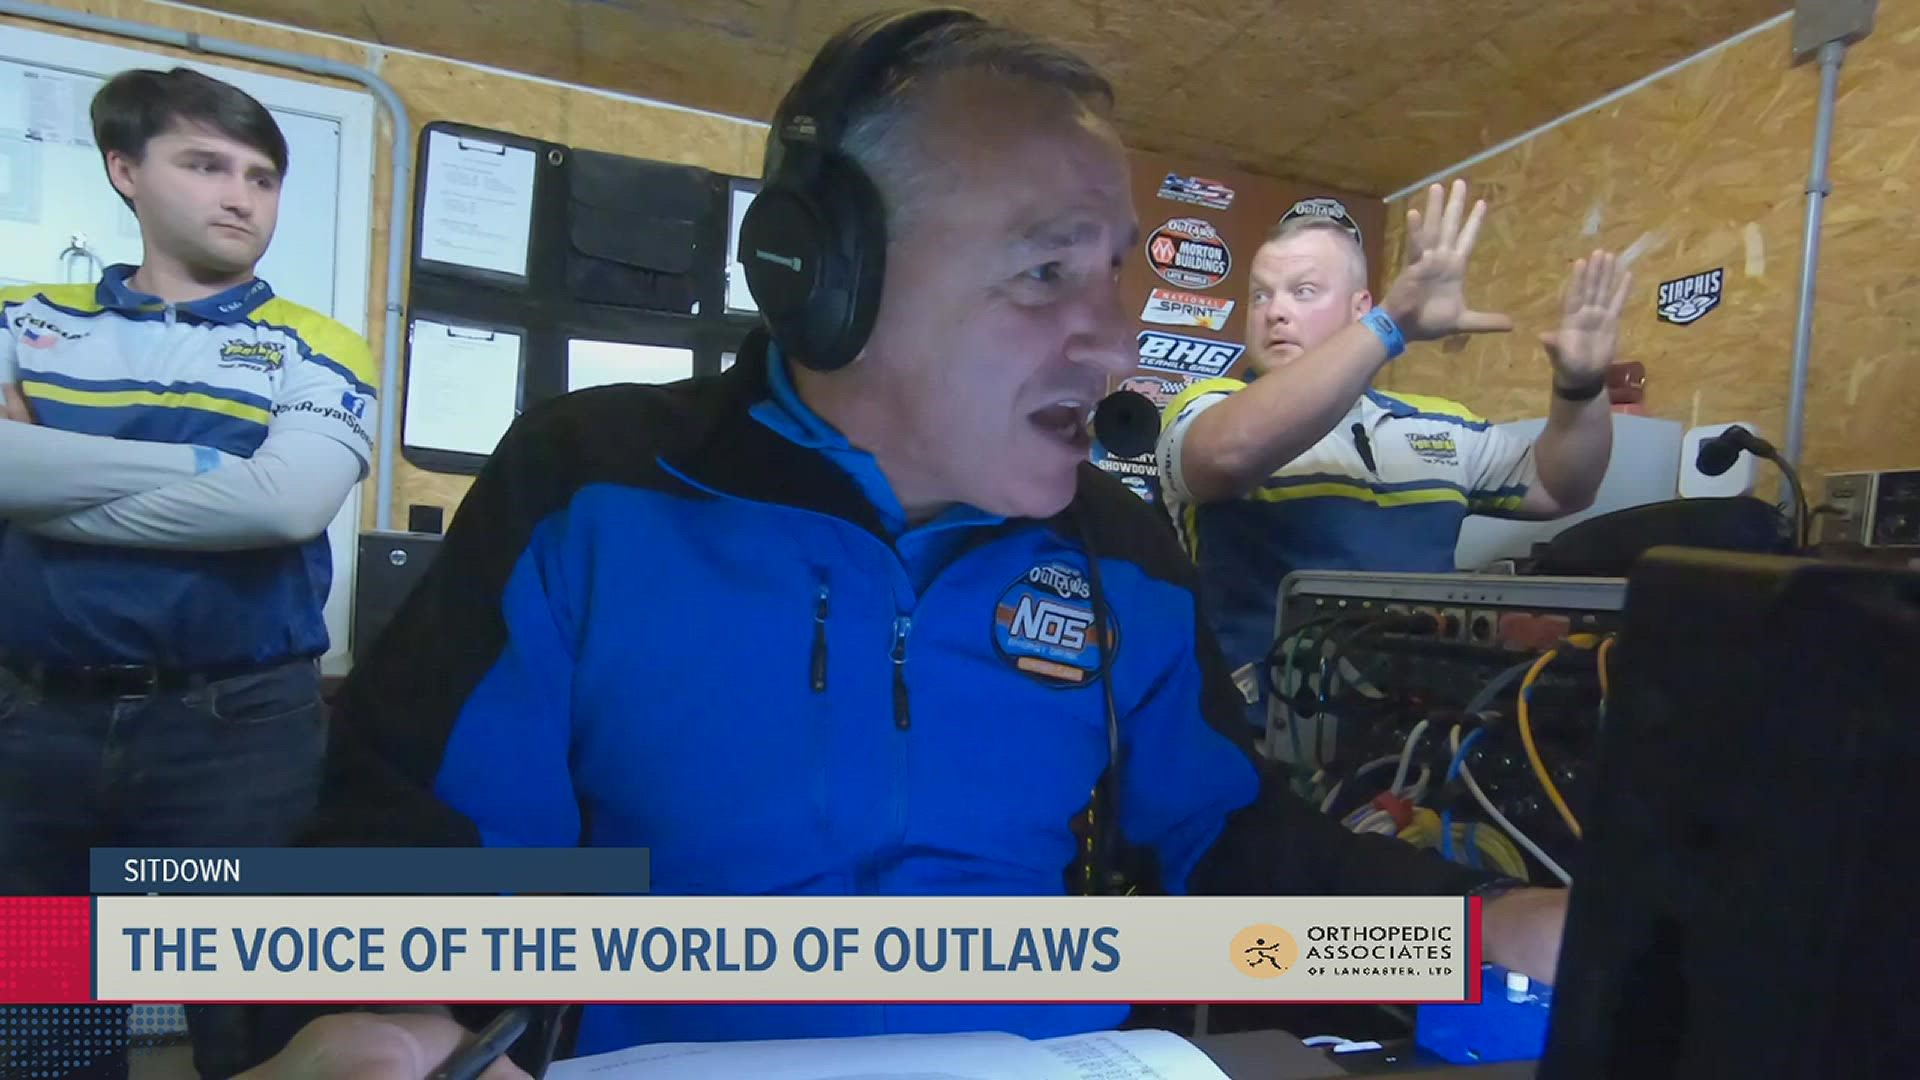 Gibson has been the voice of the World of Outlaws Sprint Cars since 1997.